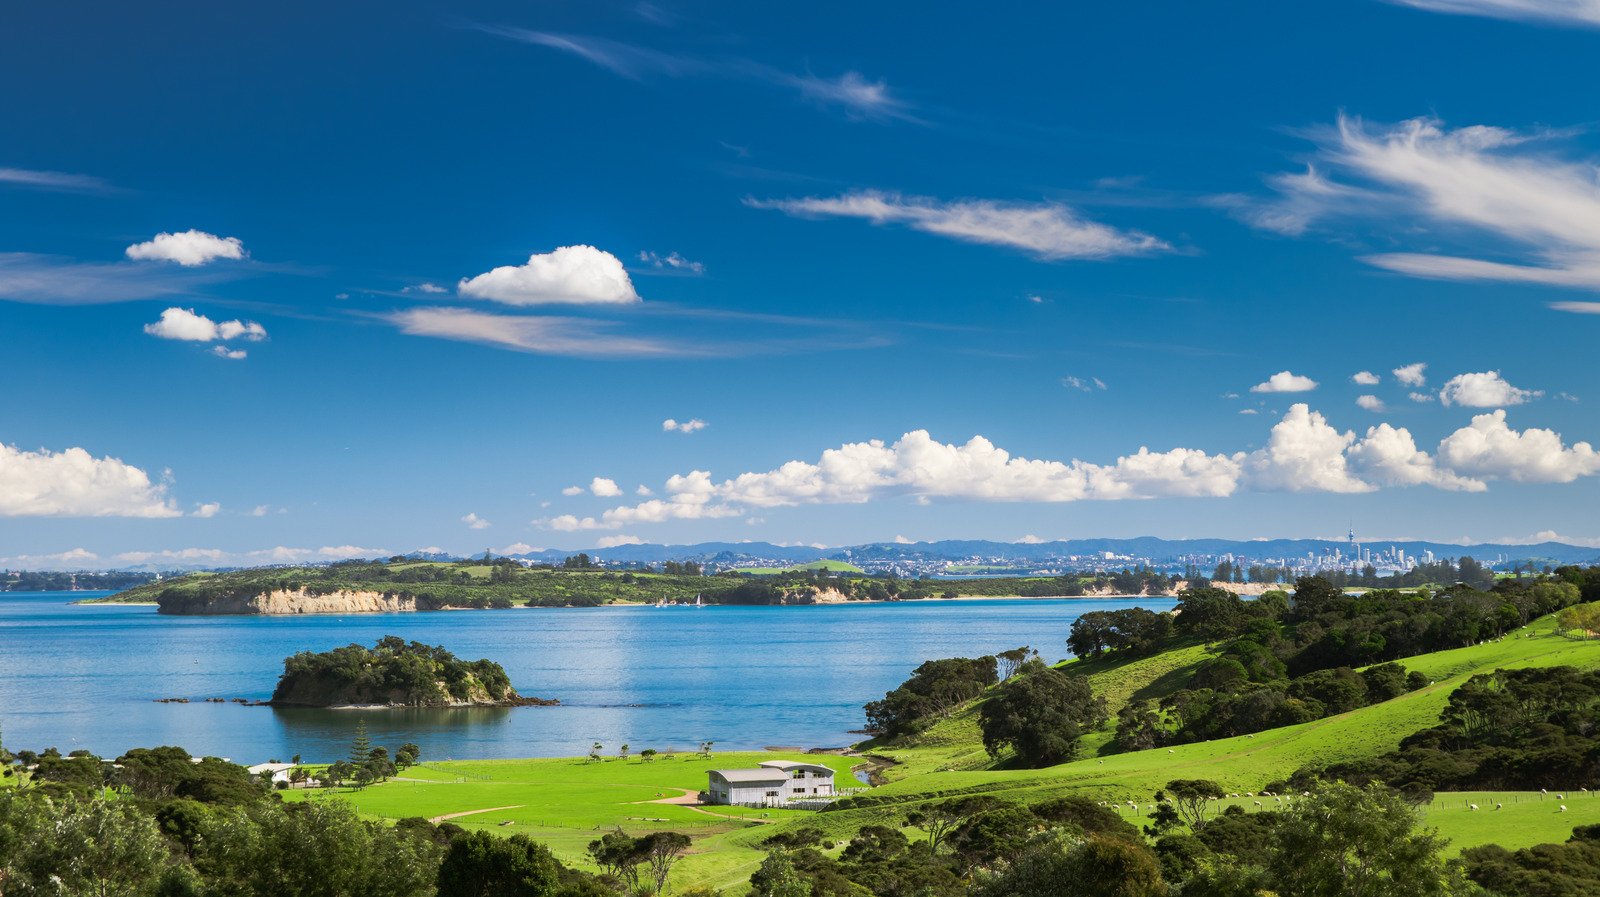 This New Zealand Island Is A Must-Visit Destination For A Wine Vacation